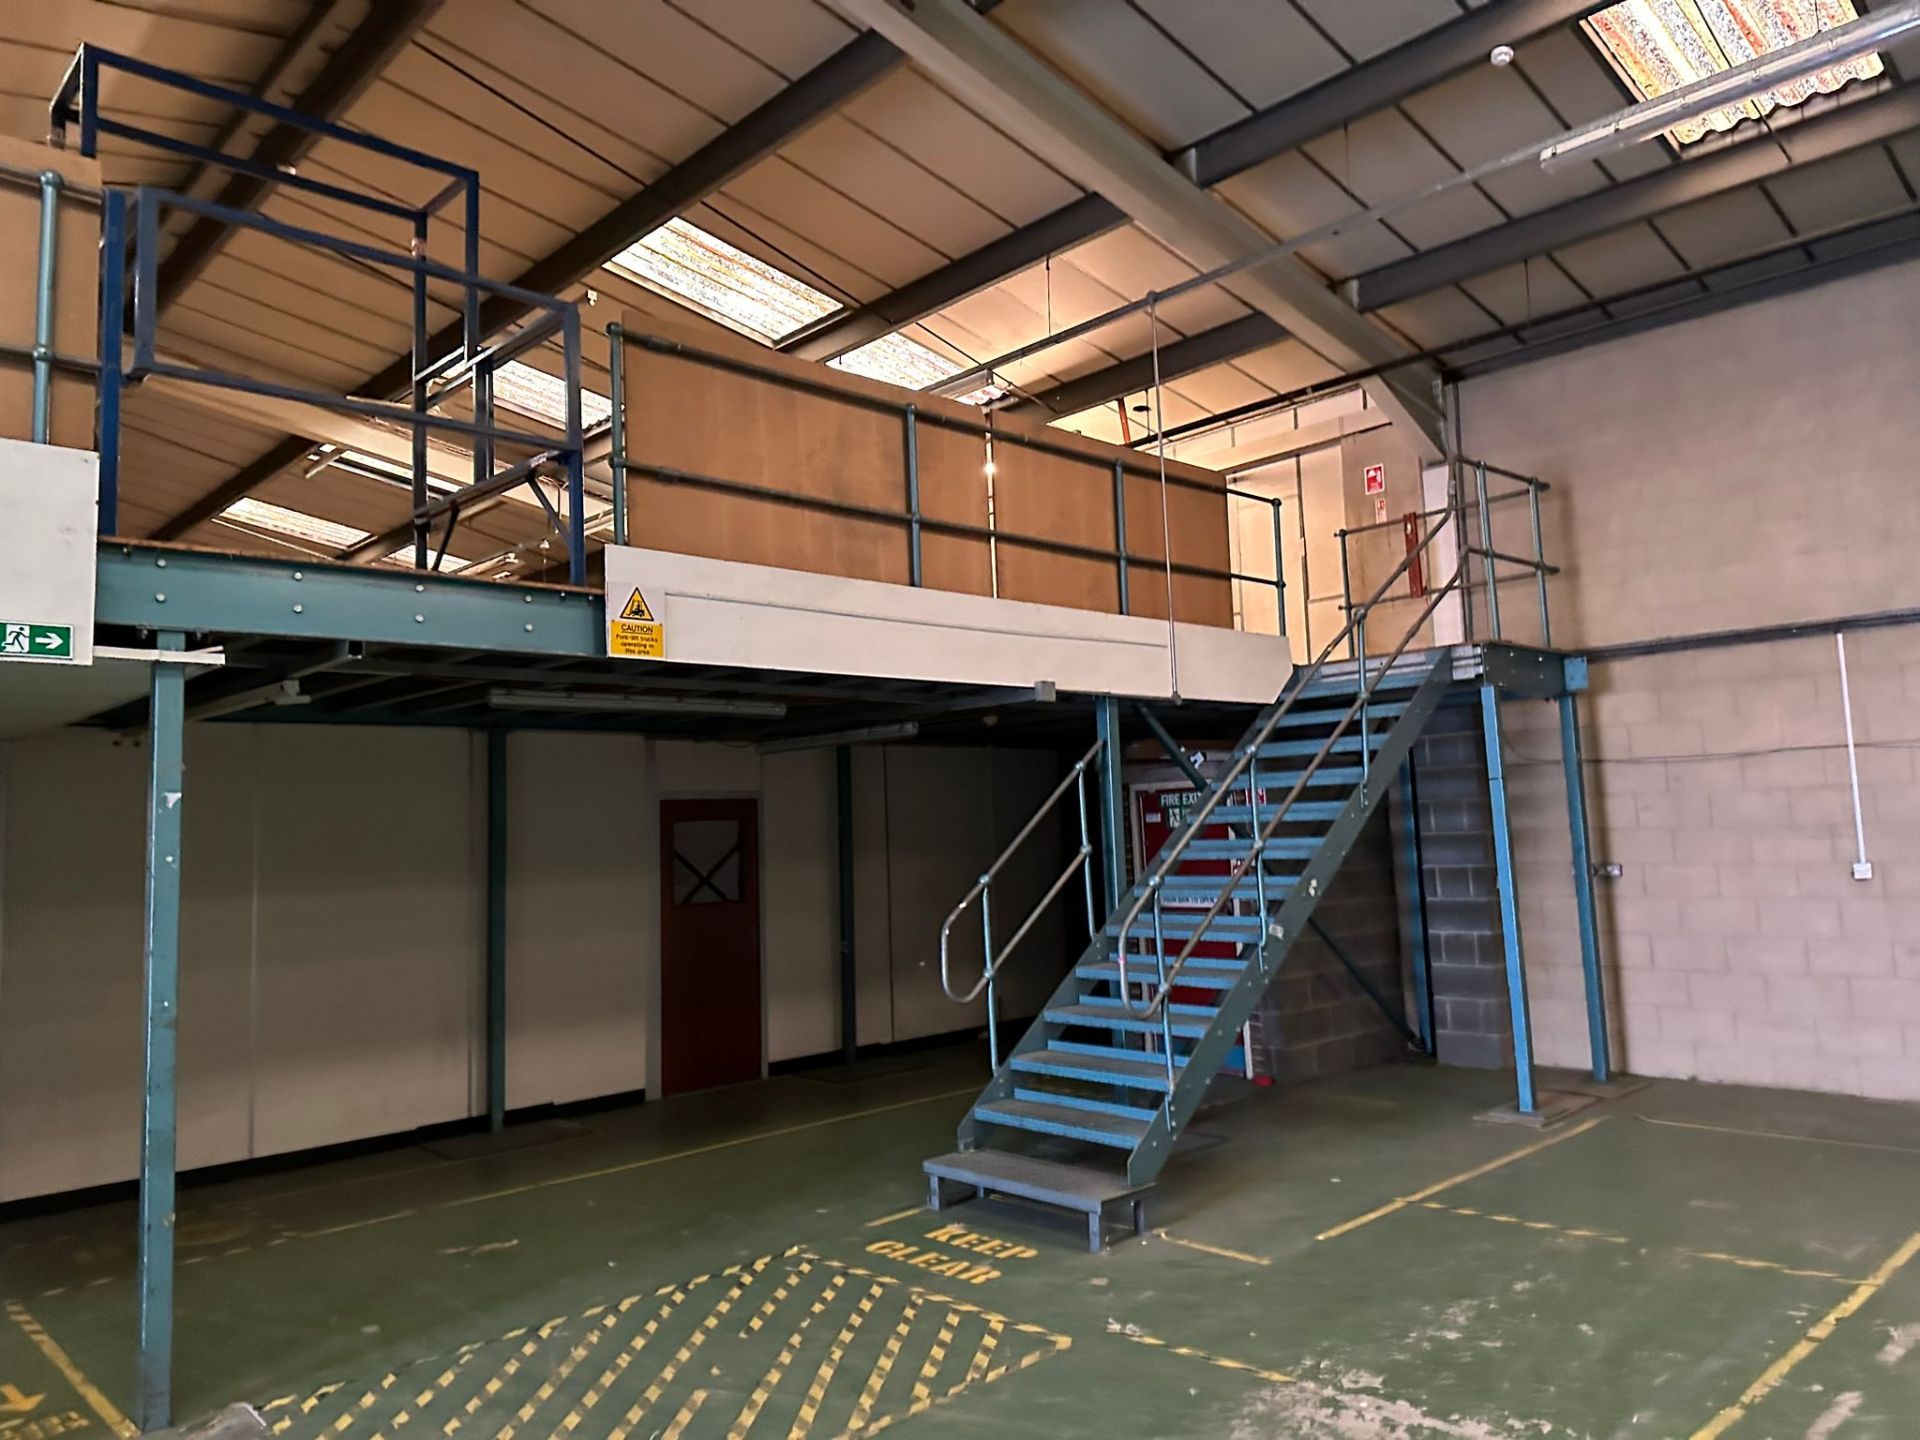 Mezzanine Floor - 498m2 - 2 Staircases, a Pallet Gate & Handrail - Image 4 of 7